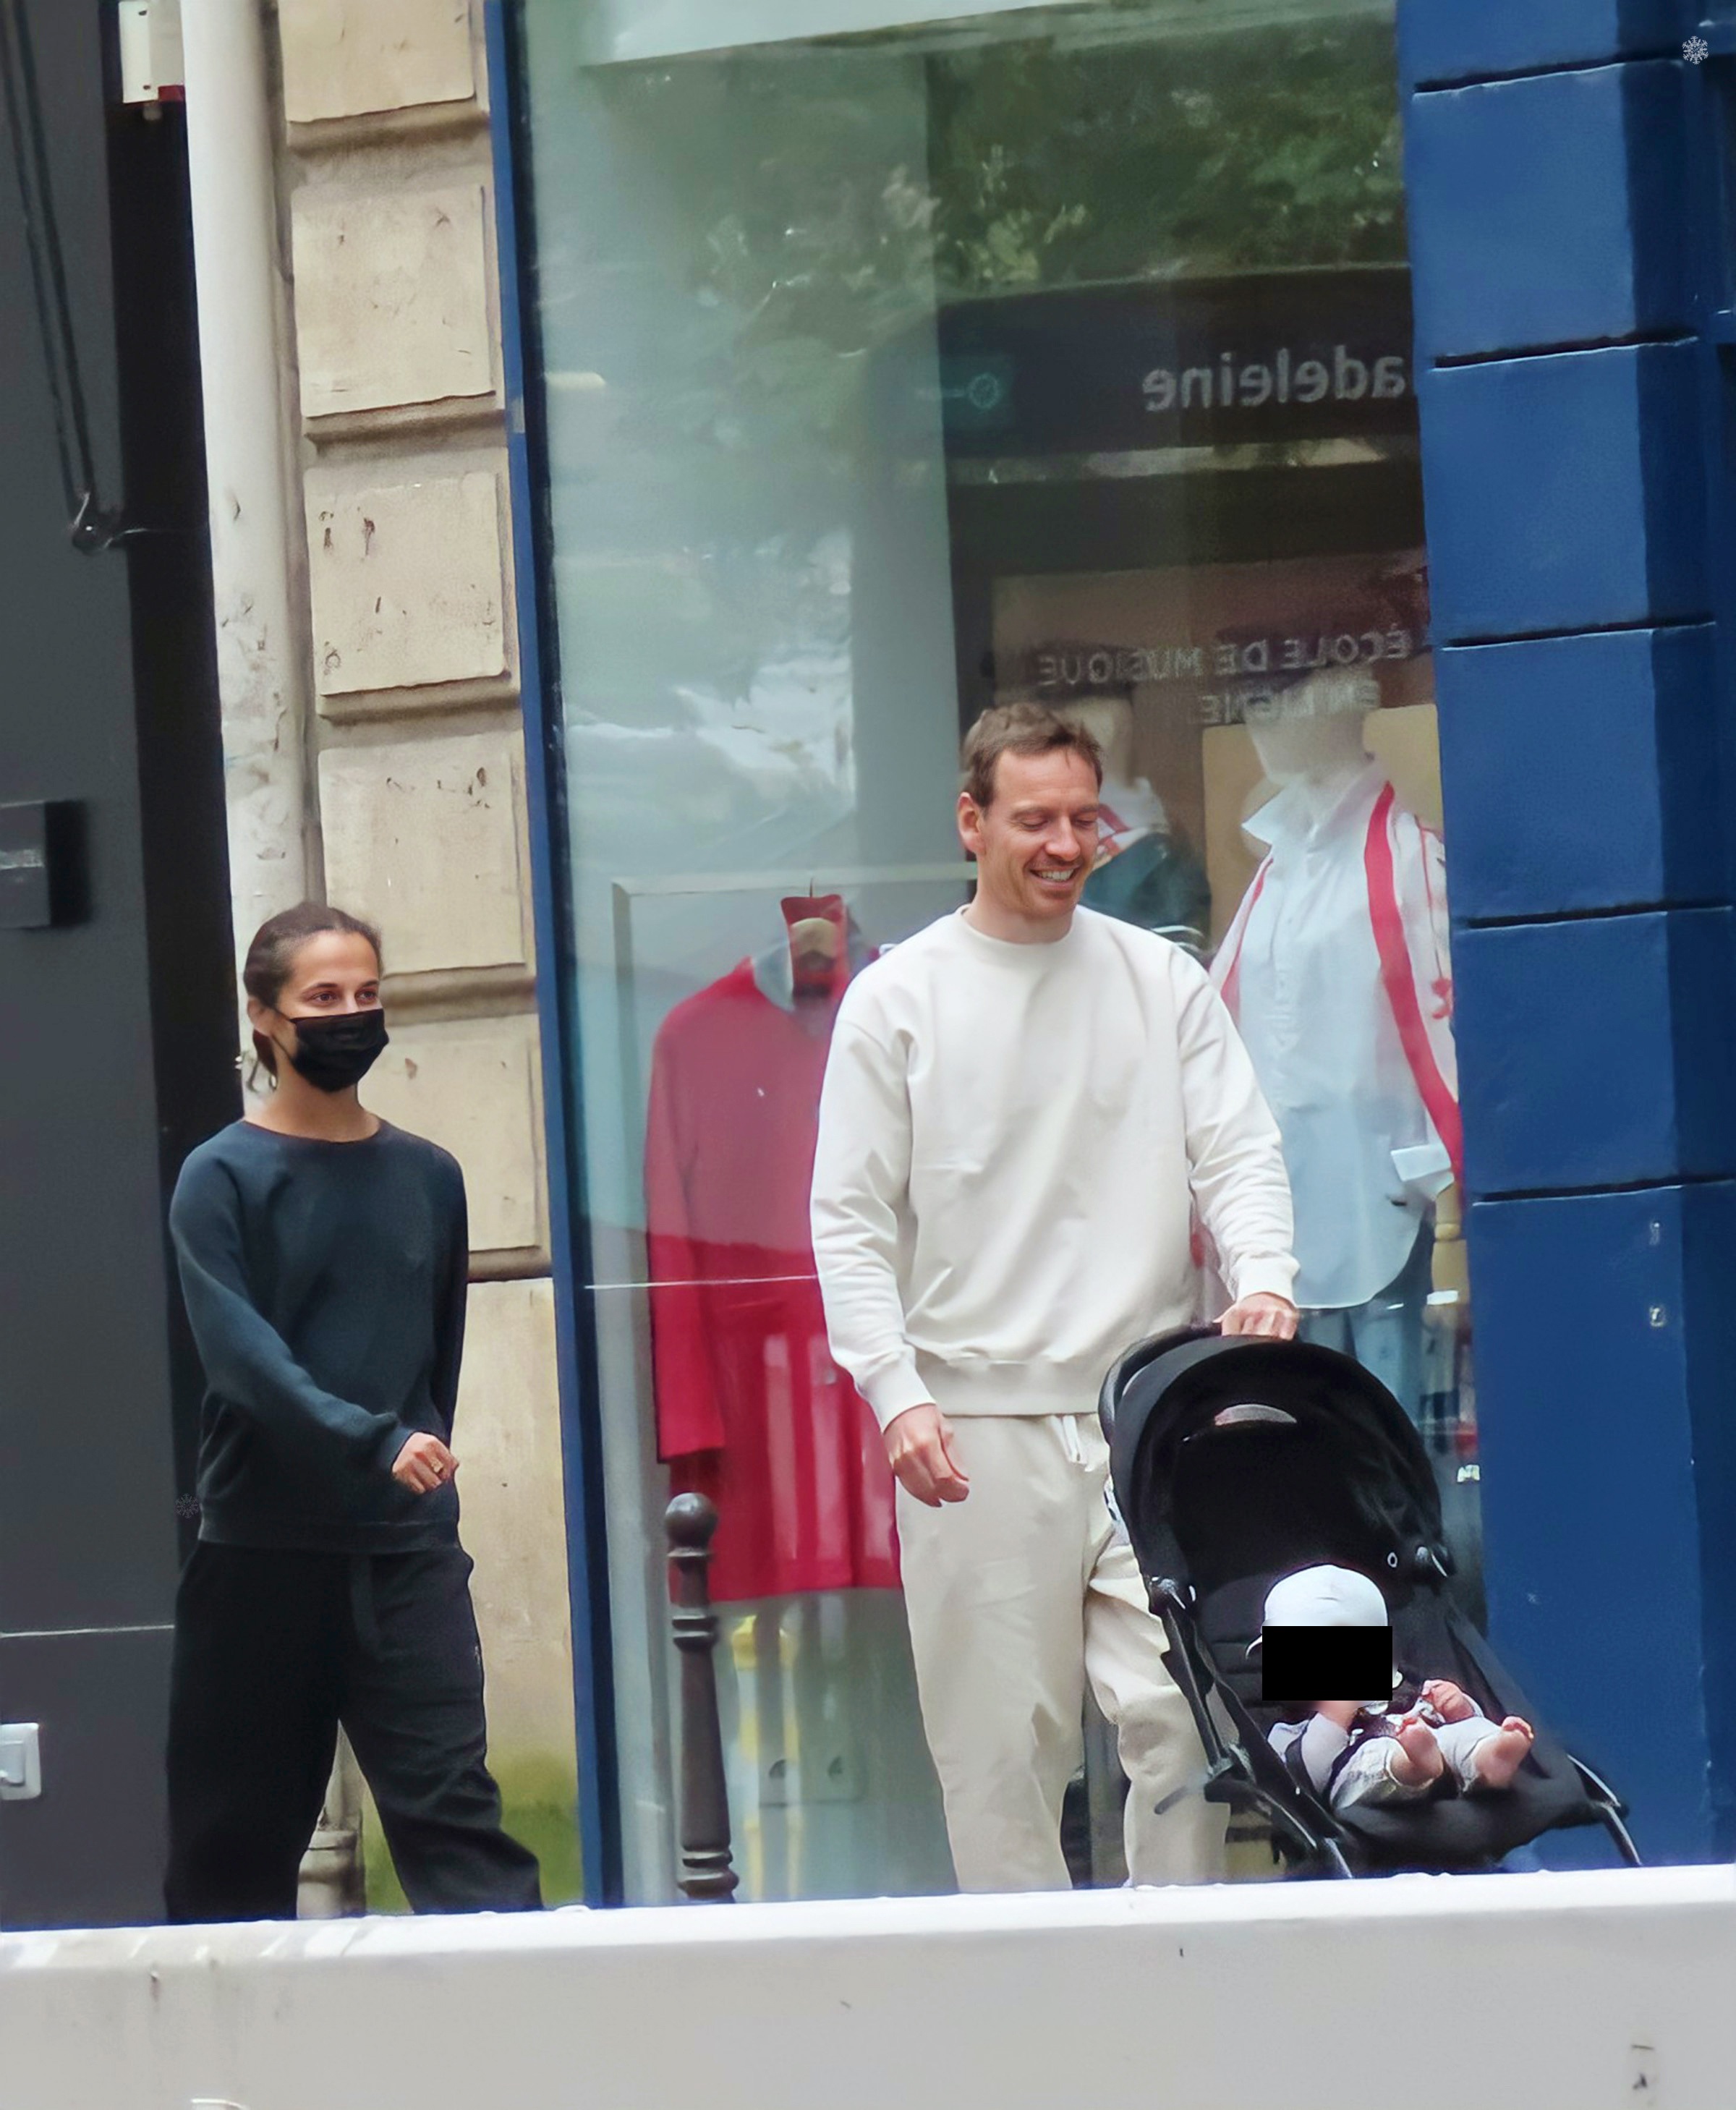 Alicia Vikander and husband Michael Fassbender seen with baby in buggy